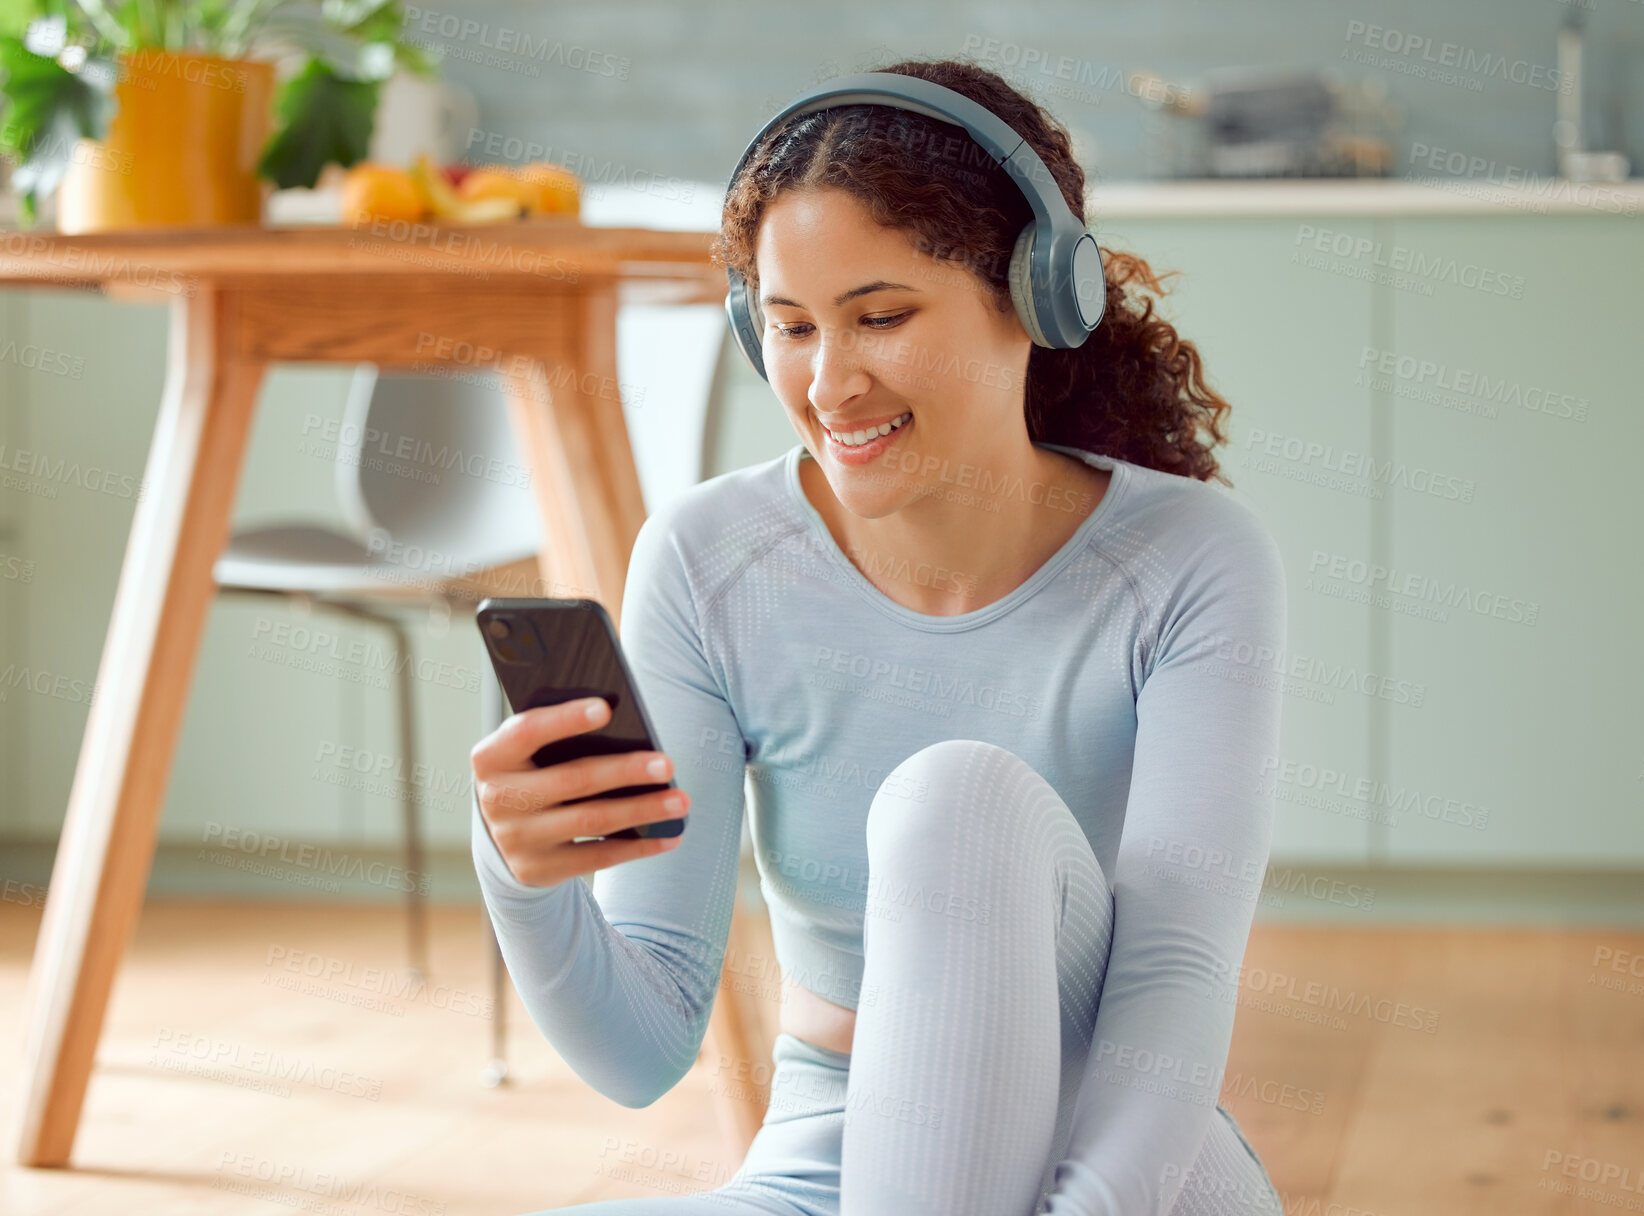 Buy stock photo Beautiful young mixed race woman listening to music while taking a break from practicing yoga at home. Hispanic female using her phone to text message, online chat or browse social media while resting